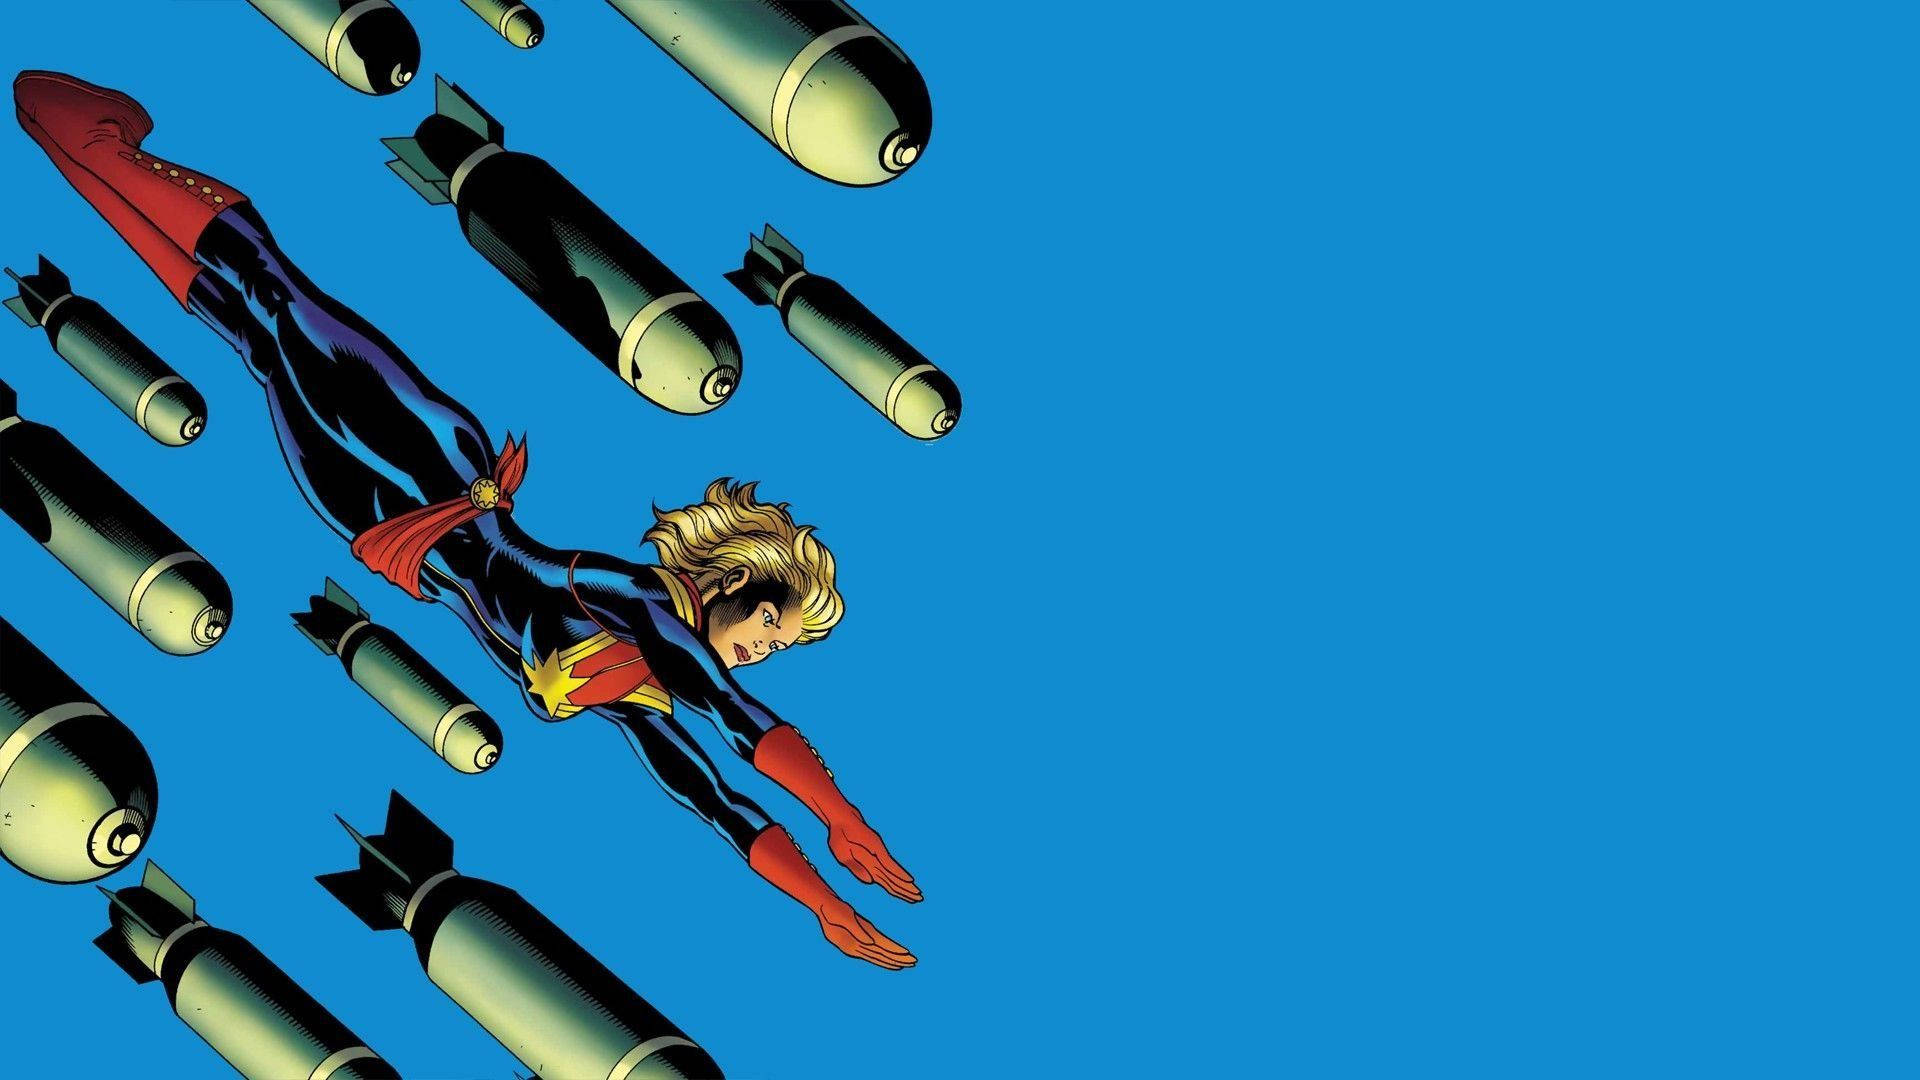 Captain Marvel taking charge and rocketing into action! Wallpaper